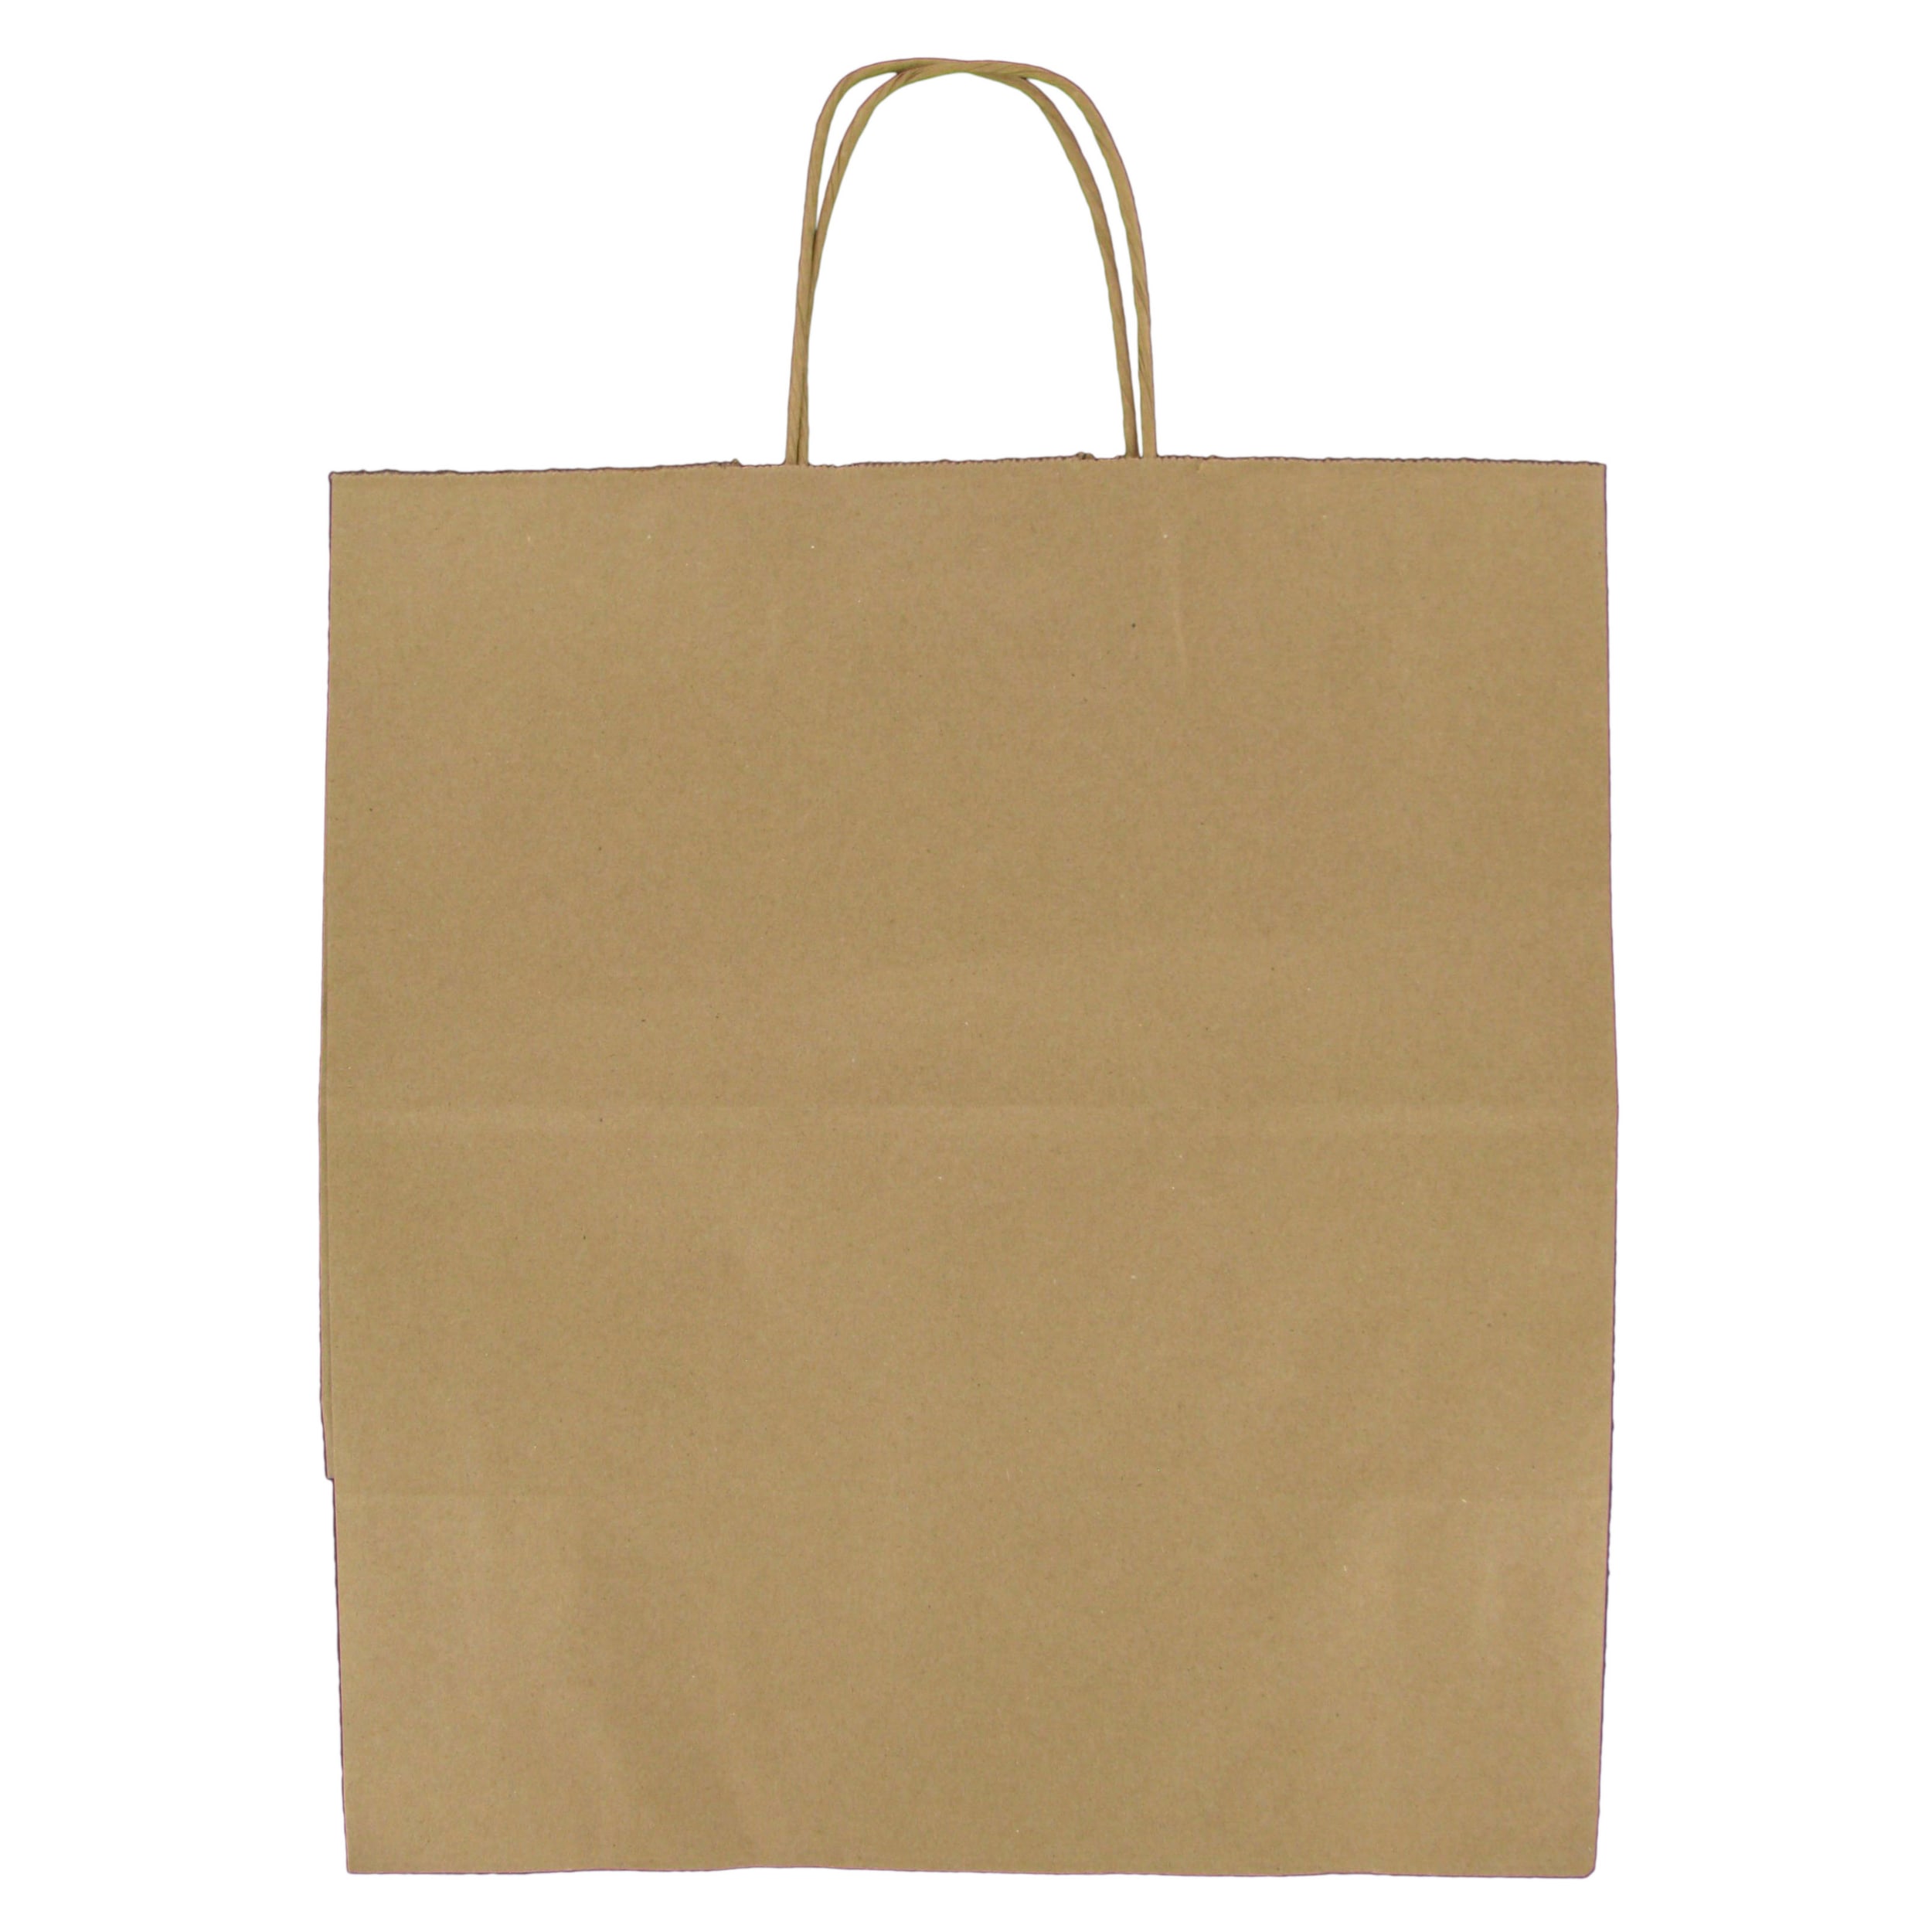 Duro Brown Bag With Handles